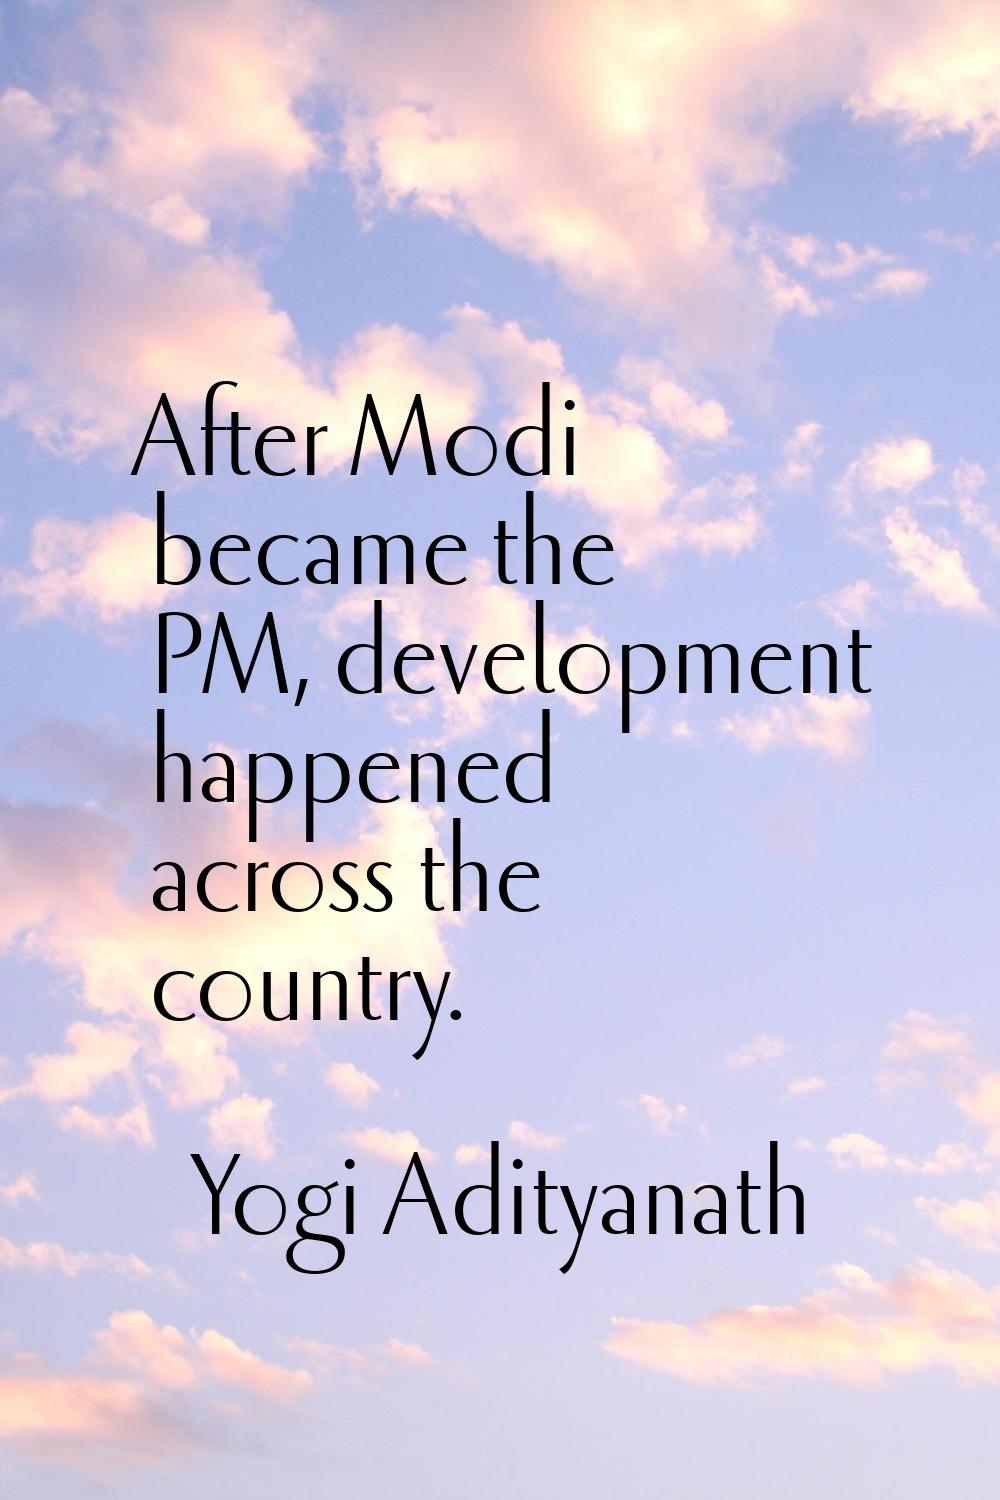 After Modi became the PM, development happened across the country.